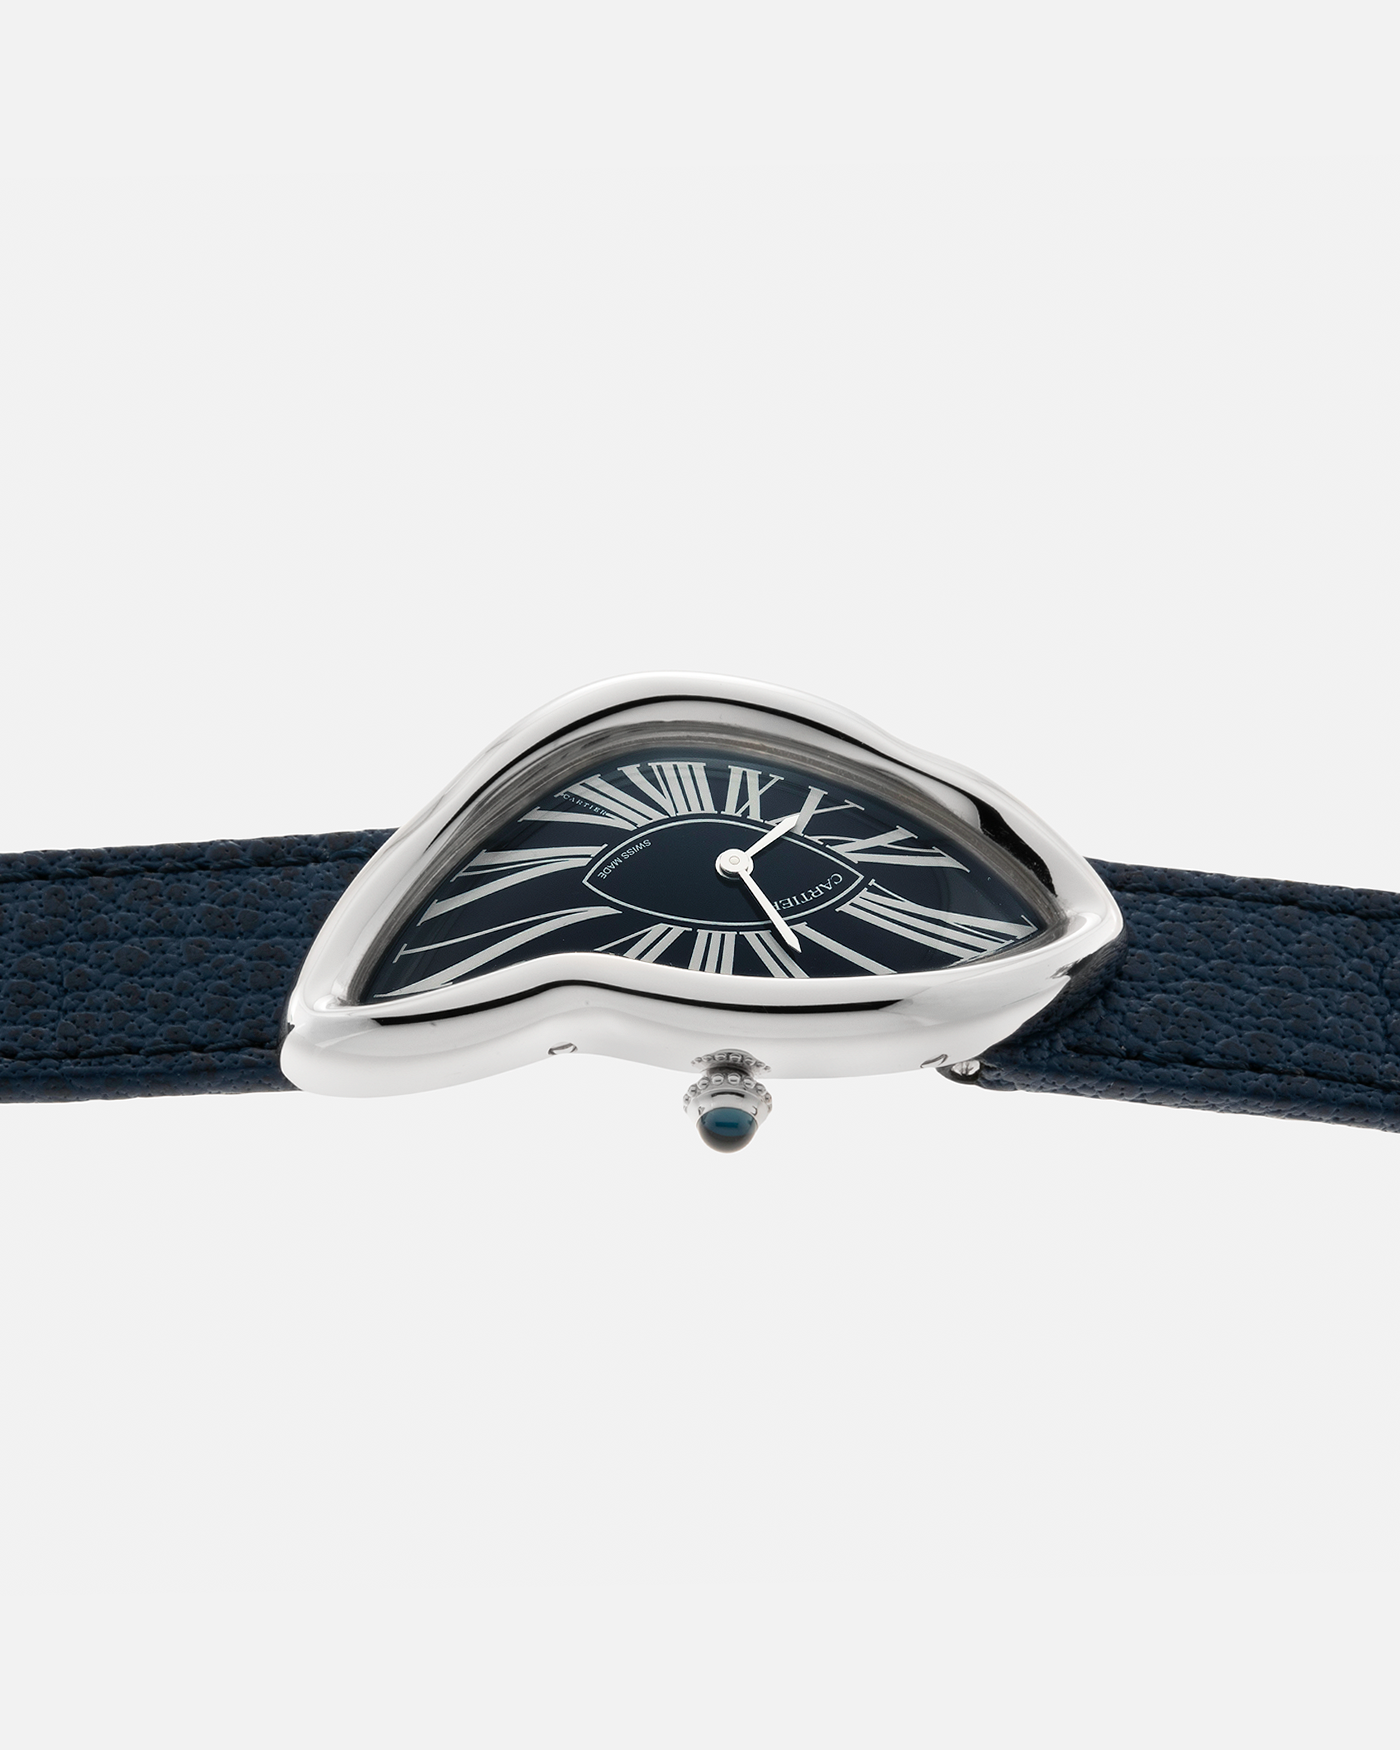 Brand: Cartier Year: 2022 Model: Crash Reference Number: WGCH0080, New Special Order Material: 18-carat White Gold (Rhodium Plated) Movement: Cartier Cal. 1917 MC, Manual-Winding Case Dimensions: 42mm x 24mm (Asymmetrical Case) Strap: Cartier Navy Blue Alligator Strap with Signed 18-carat White Gold ‘Crash’ Deployant Buckle